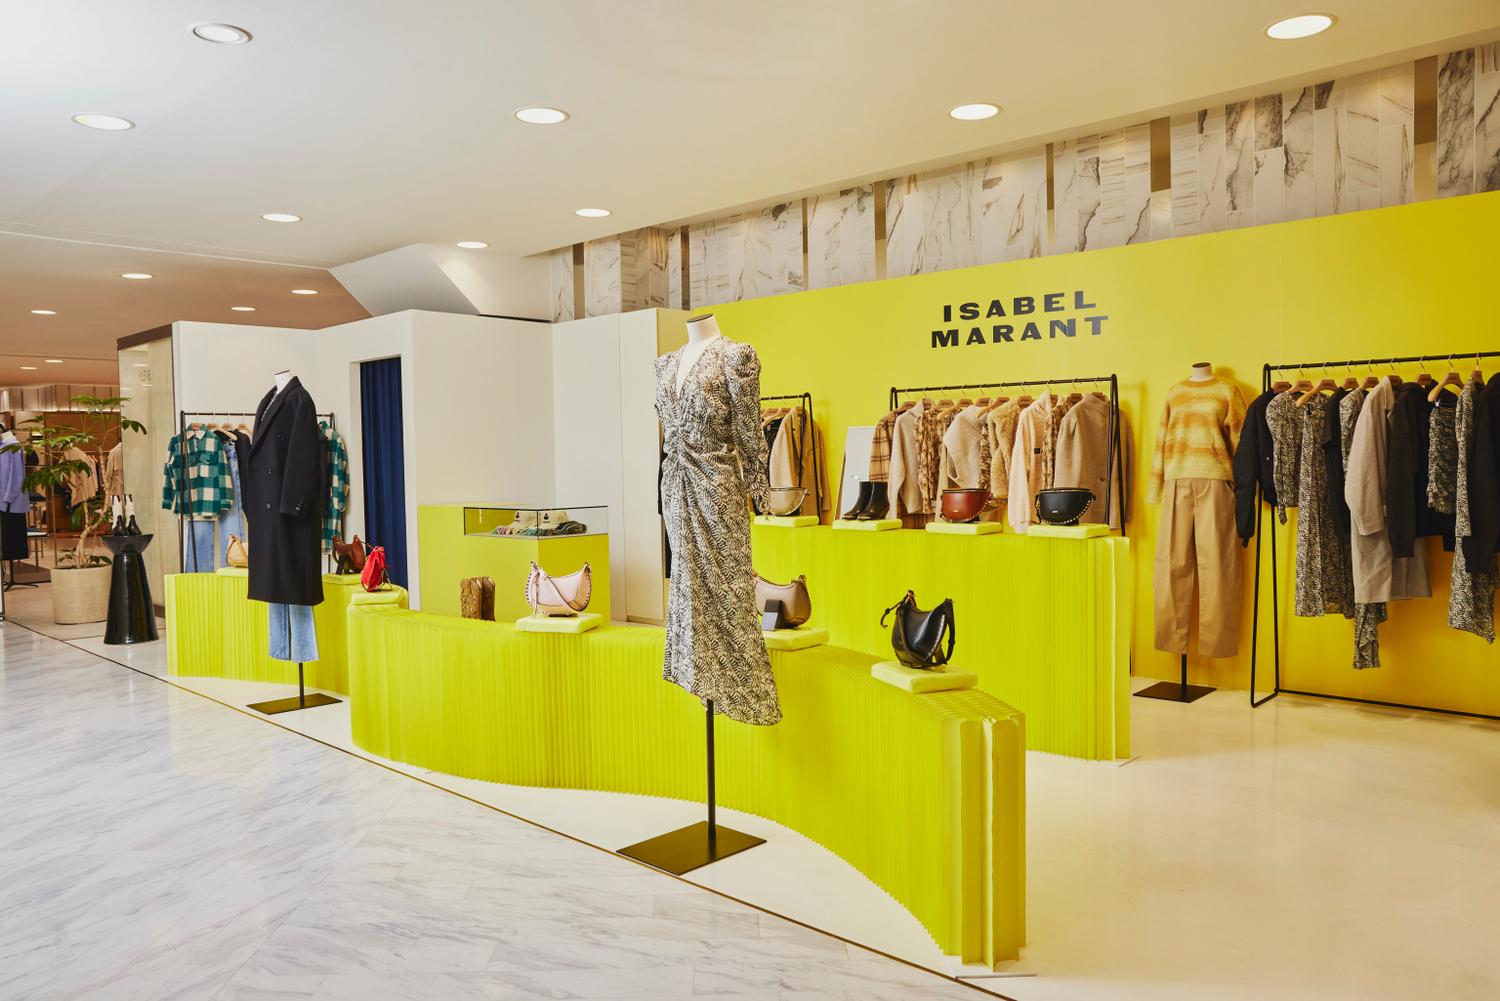 Image of yellow display area featuring the Isabel Marant clothing collection, including sweaters, pants, dresses and handbags.